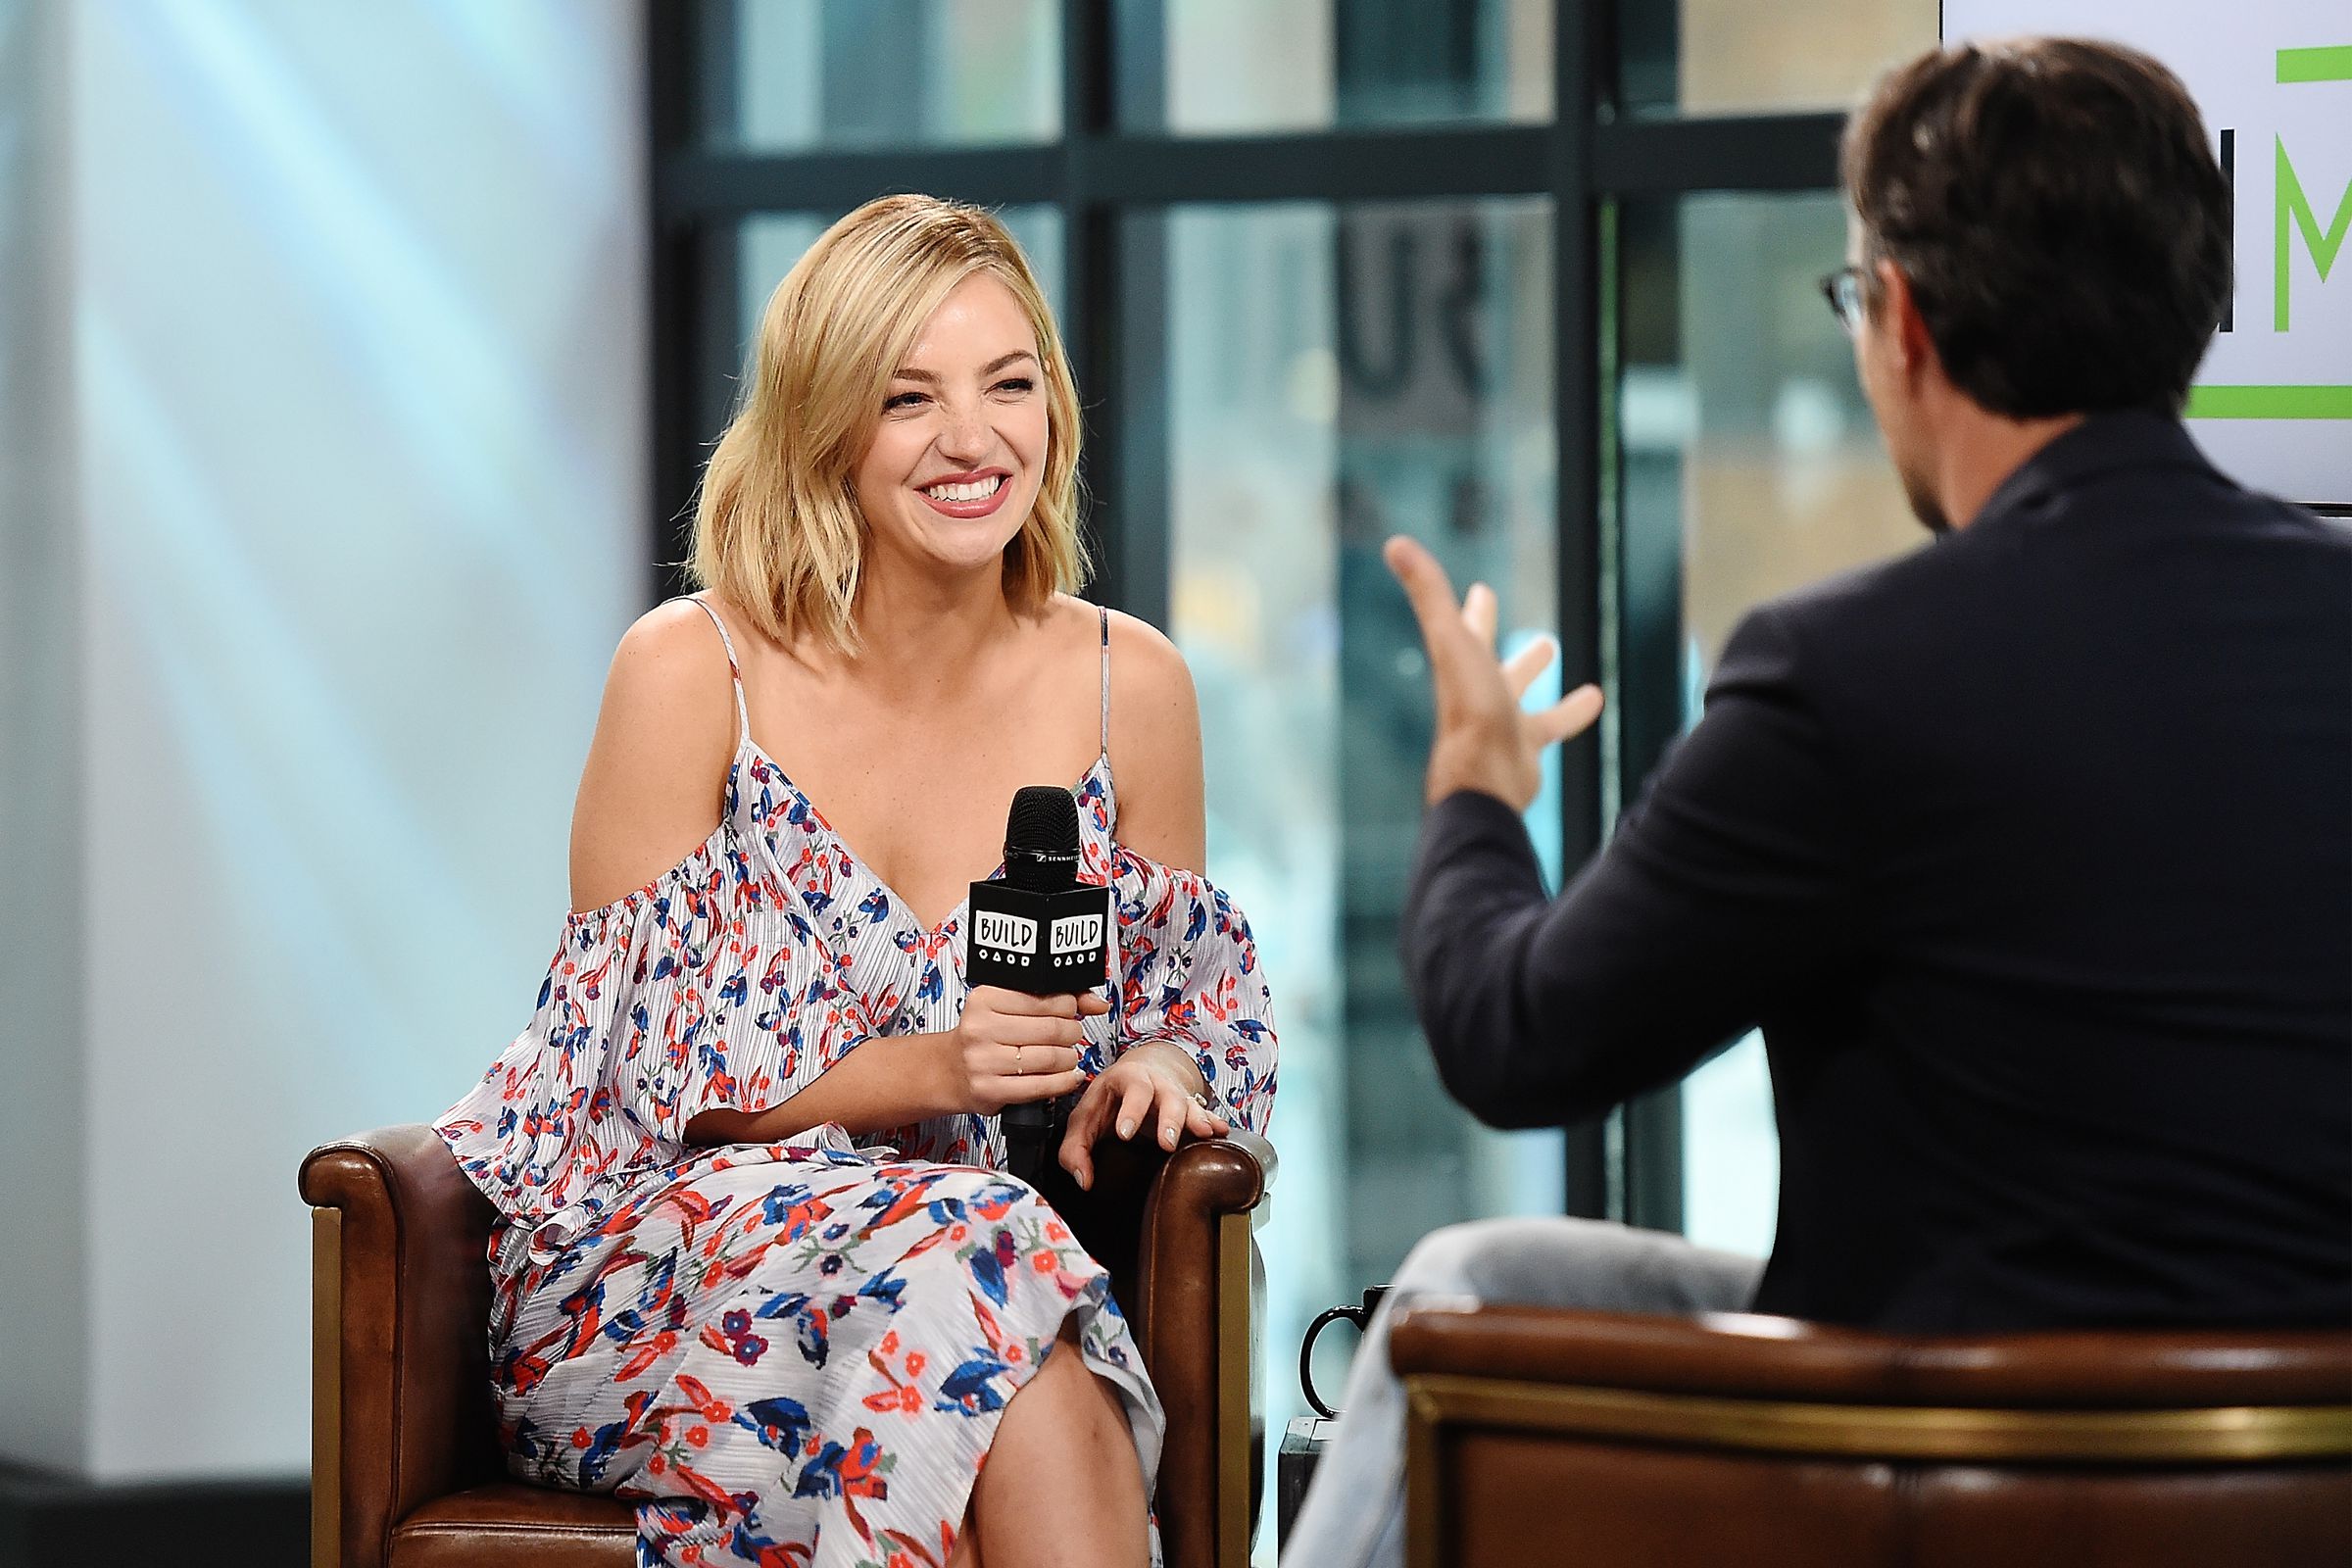 Build Presents Abby Elliott Discussing The Show 'Odd Mom Out'